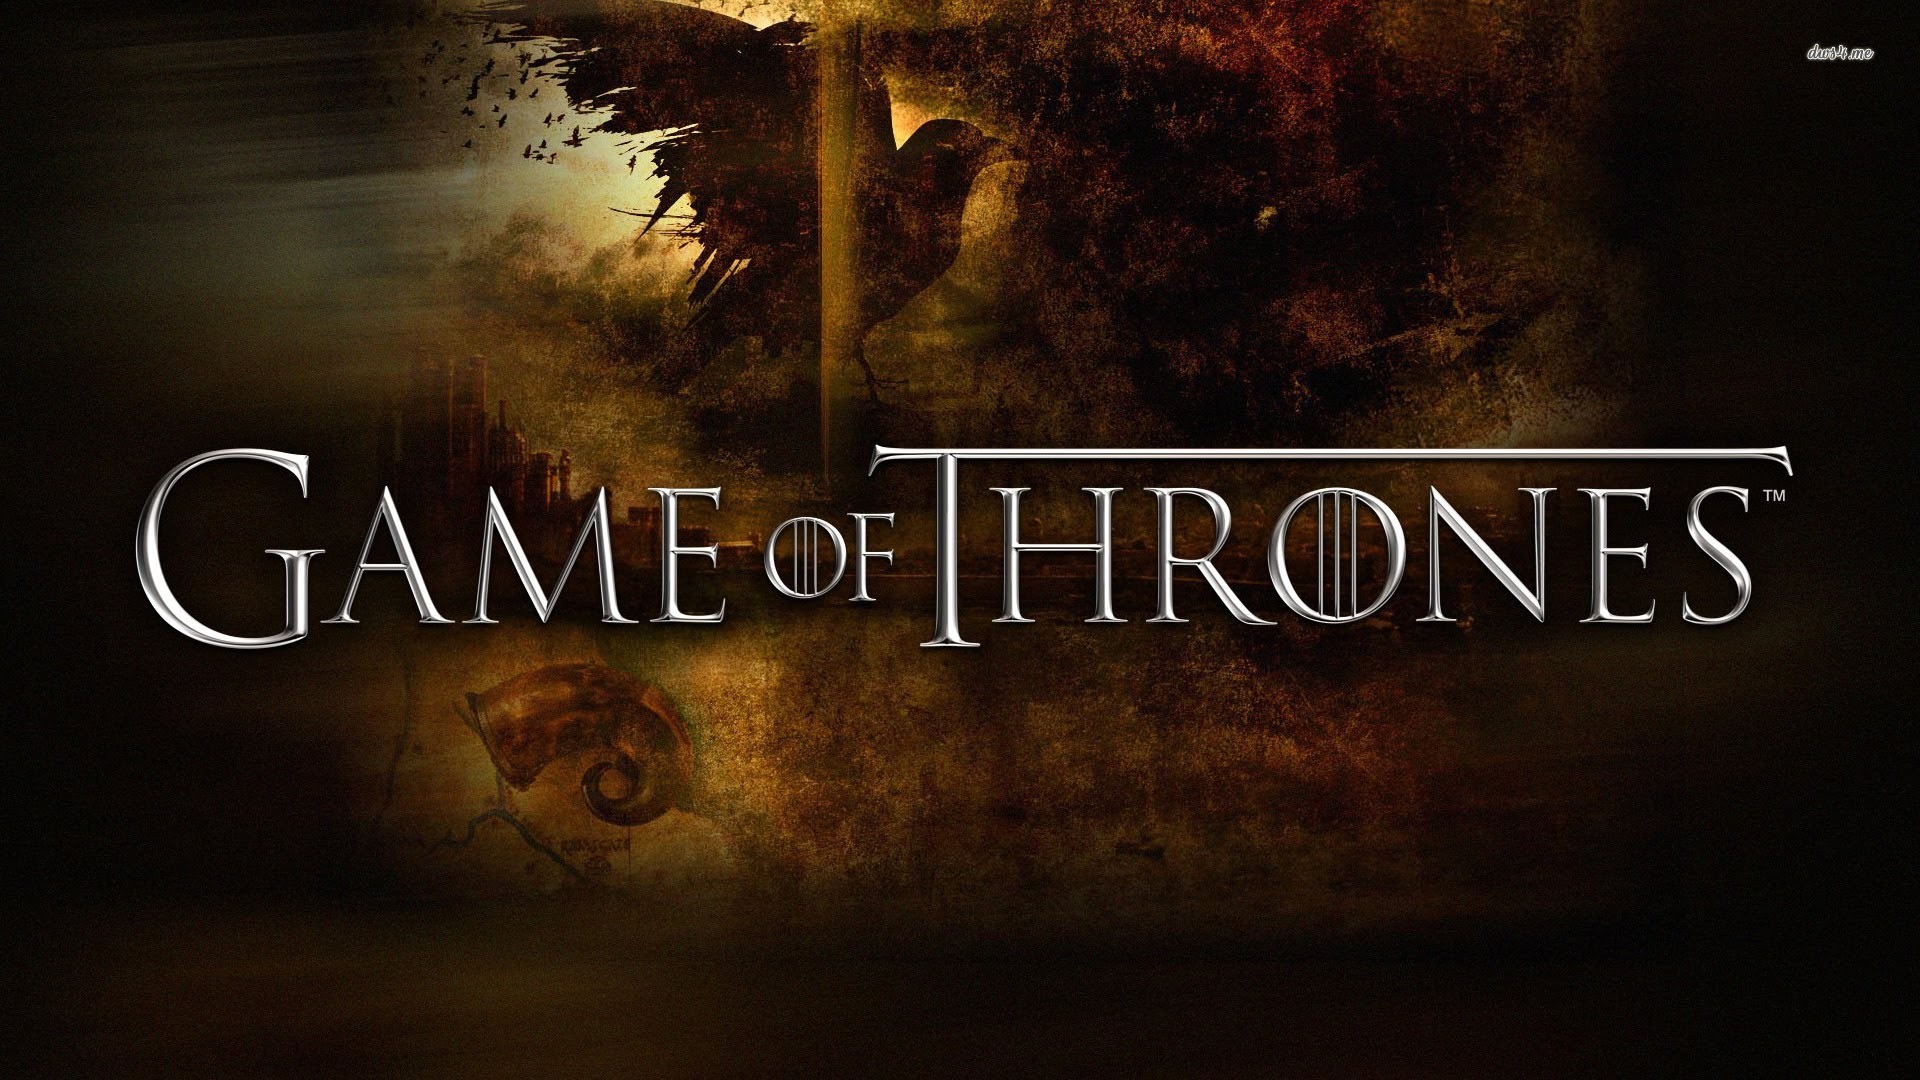 Hd Wallpapers Pack Juego De Tronos Games Of Thrones Youtube 1920x1080